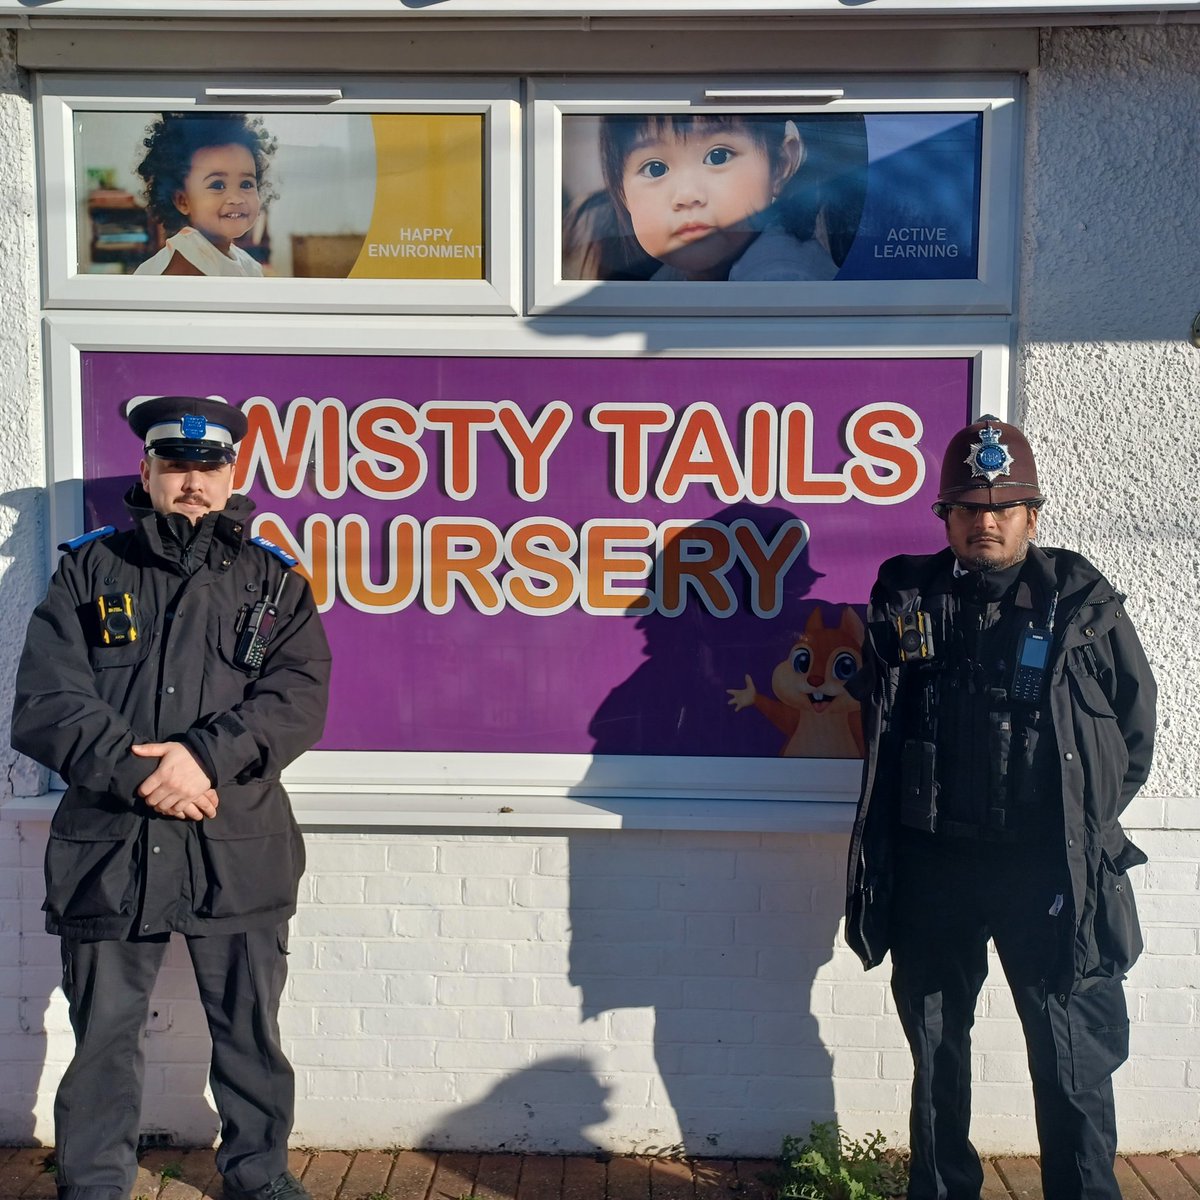 Community visit to Twisty Tails Nursery this week to talk about 'People who can help us'